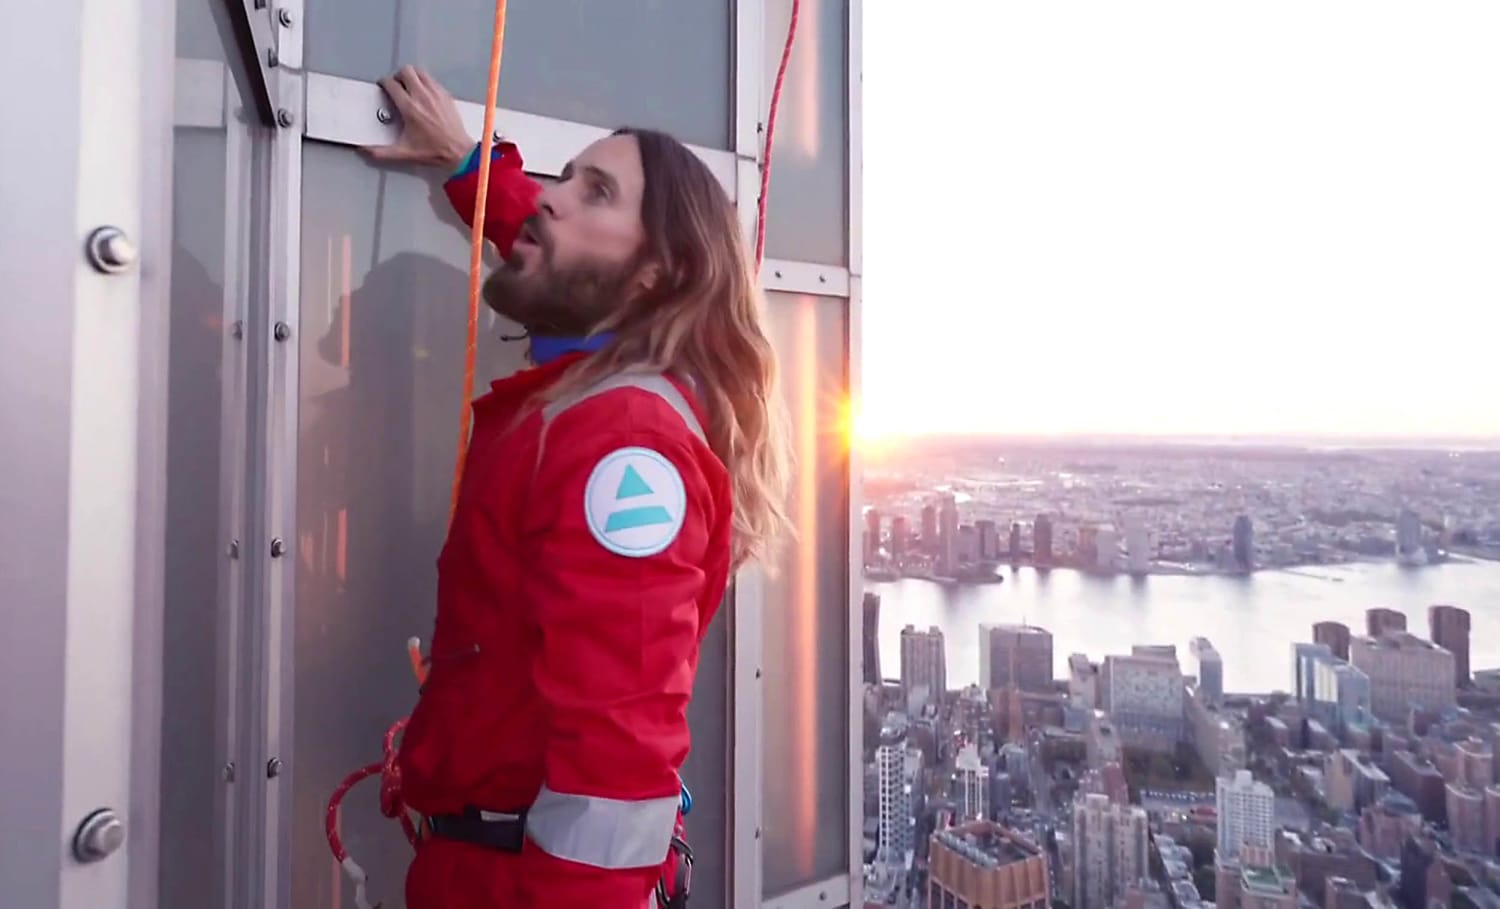 Exclusive: Jared Leto scales the Empire State Building: 'Harder than I thought it would be'